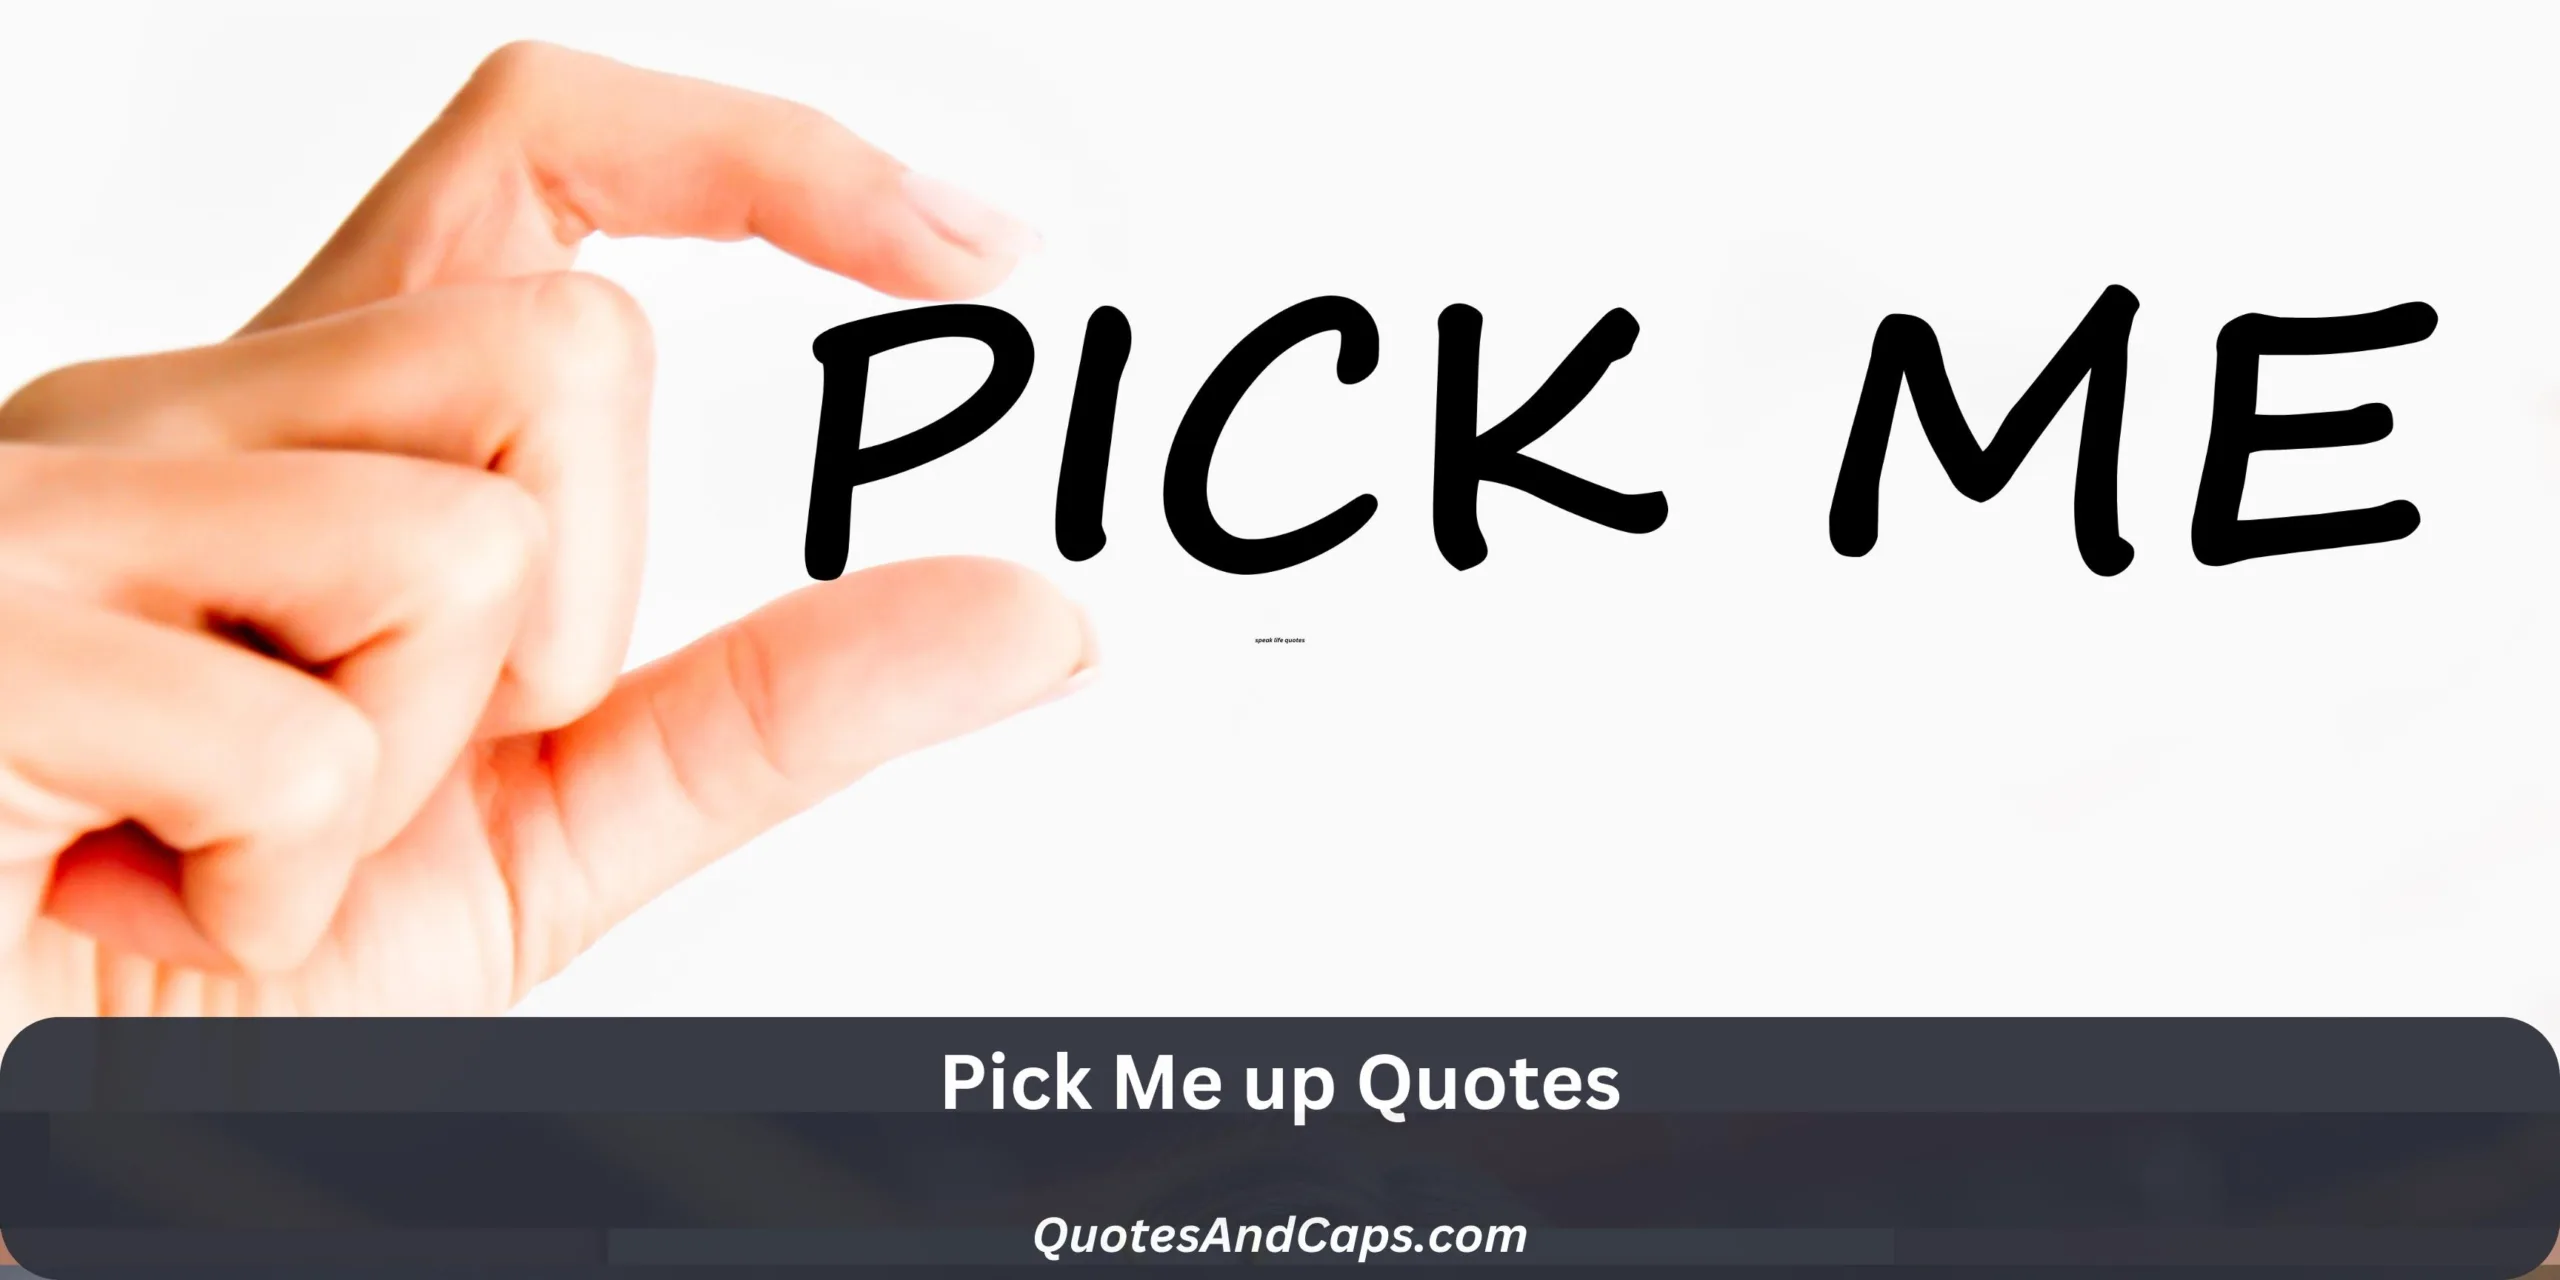 Pick Me up Quotes